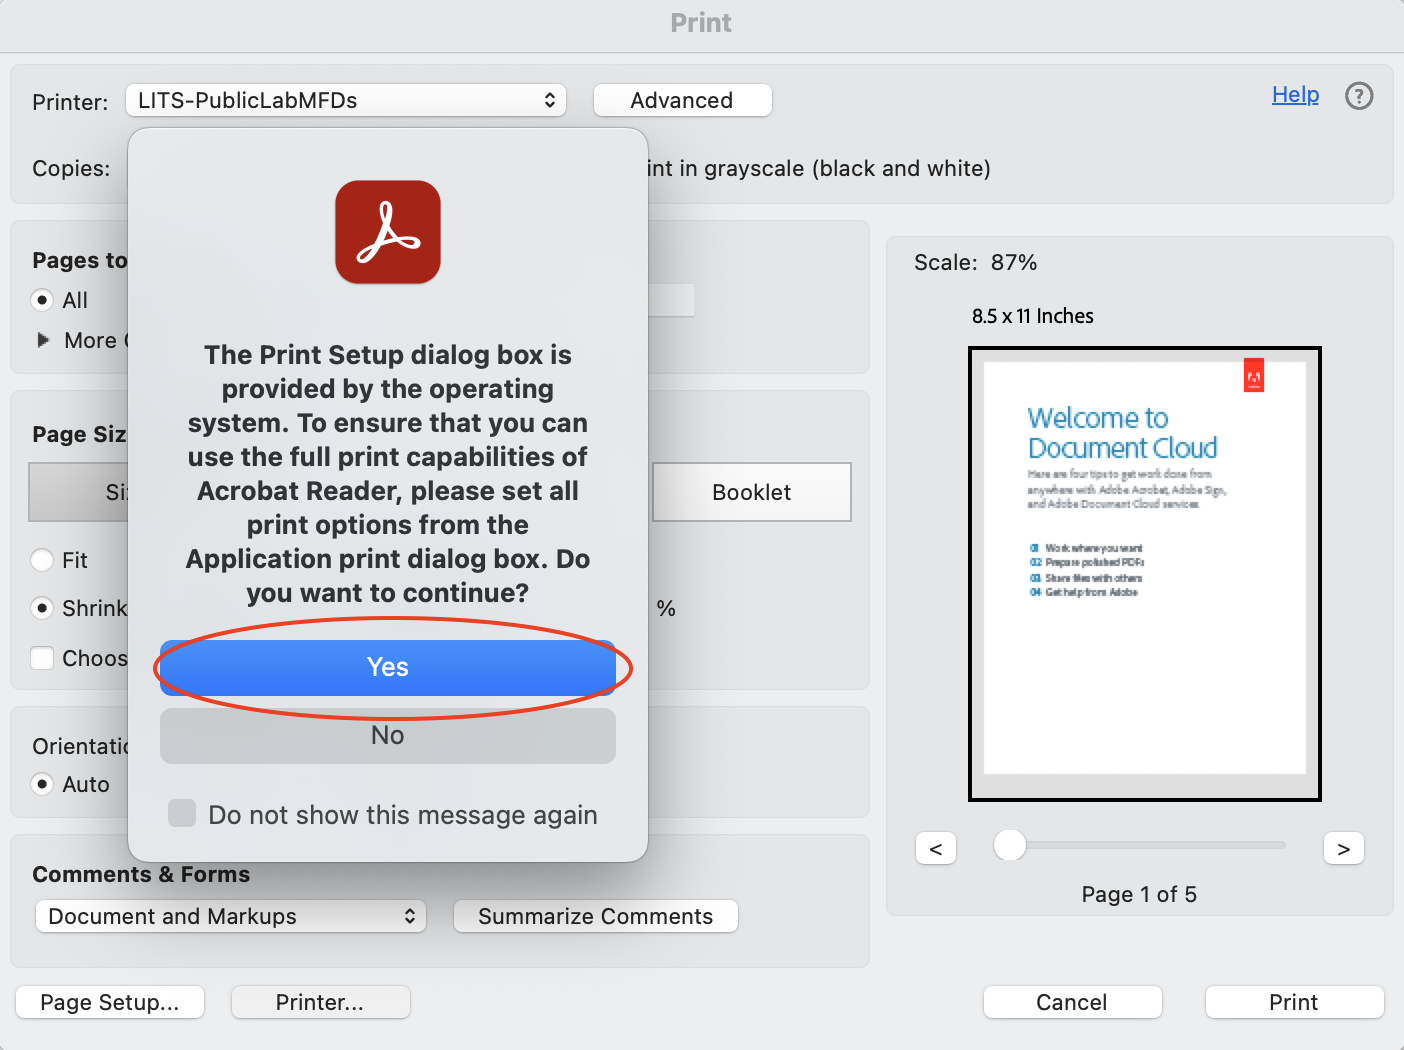 Yes highlighted in a red circle on the pop up dialog about changing the print setup dialog